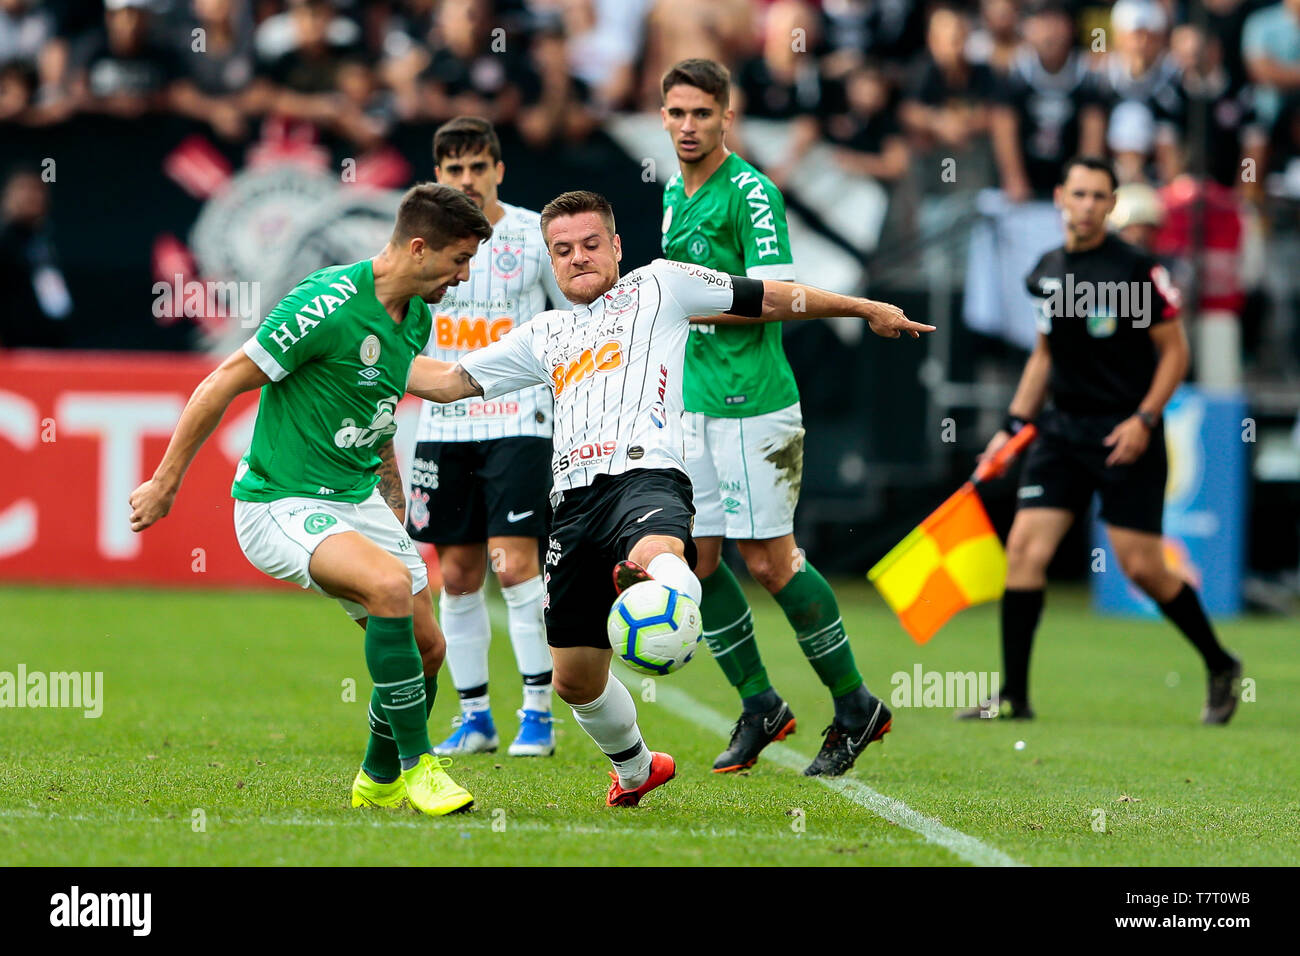 SÃO PAULO, SP, 01.05.2019: FOOTBALL - CORINTHIANS-CHAPECOENSE. Lance match between Corinthinas and Chapecoense, valid for the second round of the 2019 Stock Photo